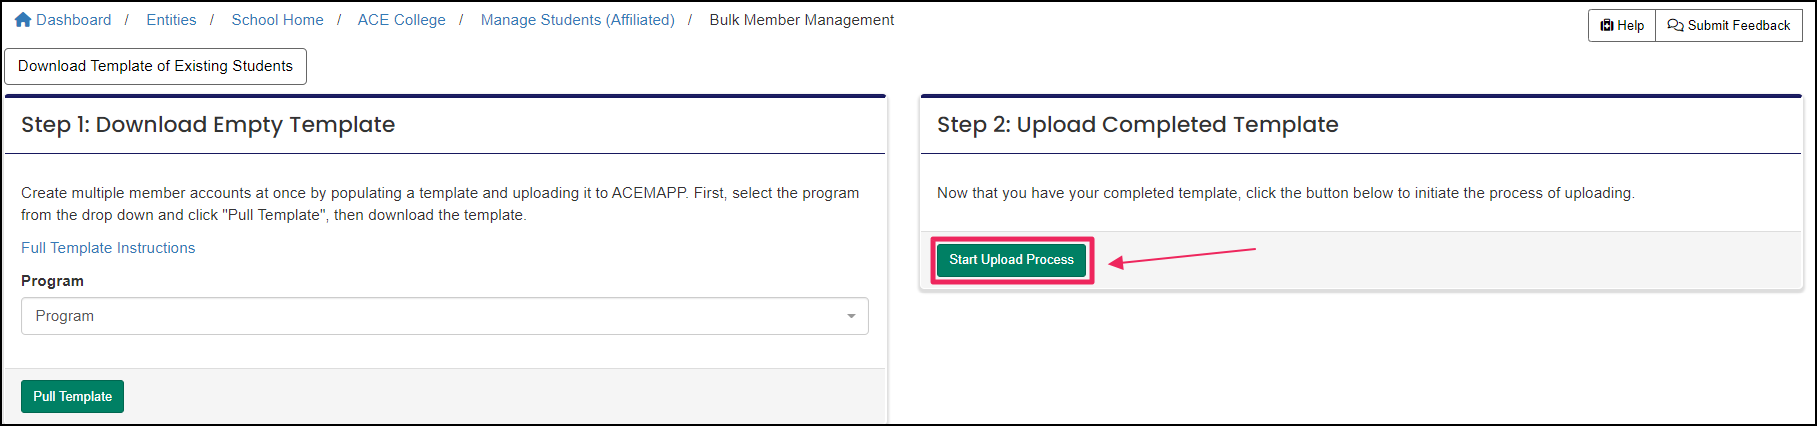 Image shows "Start Upload Process" button.